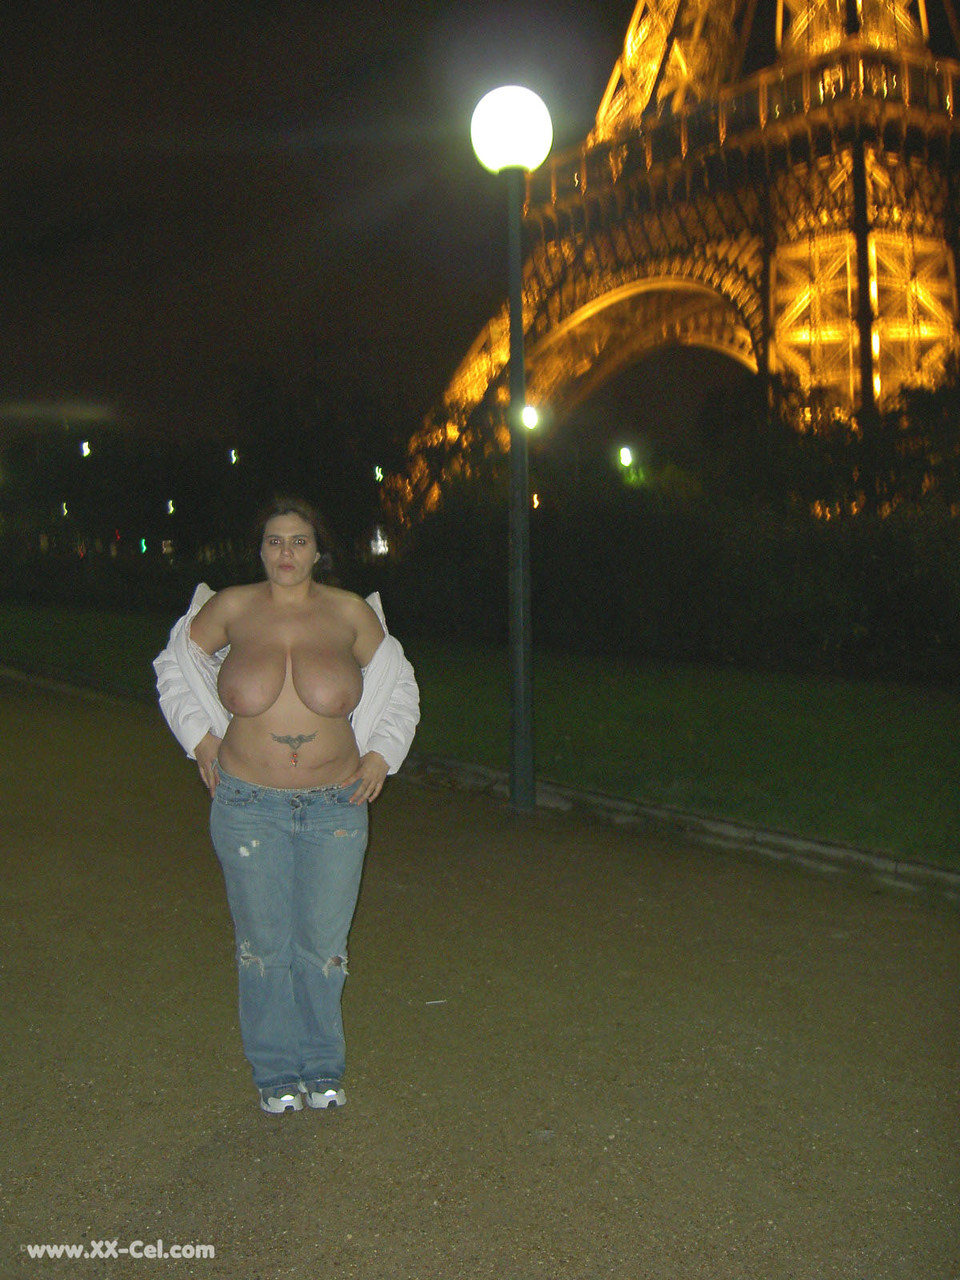 Stacked amateur Tristal showing her big saggy tits in Paris at night 色情照片 #424712376 | XX Cel Pics, Tristal, MILF, 手机色情